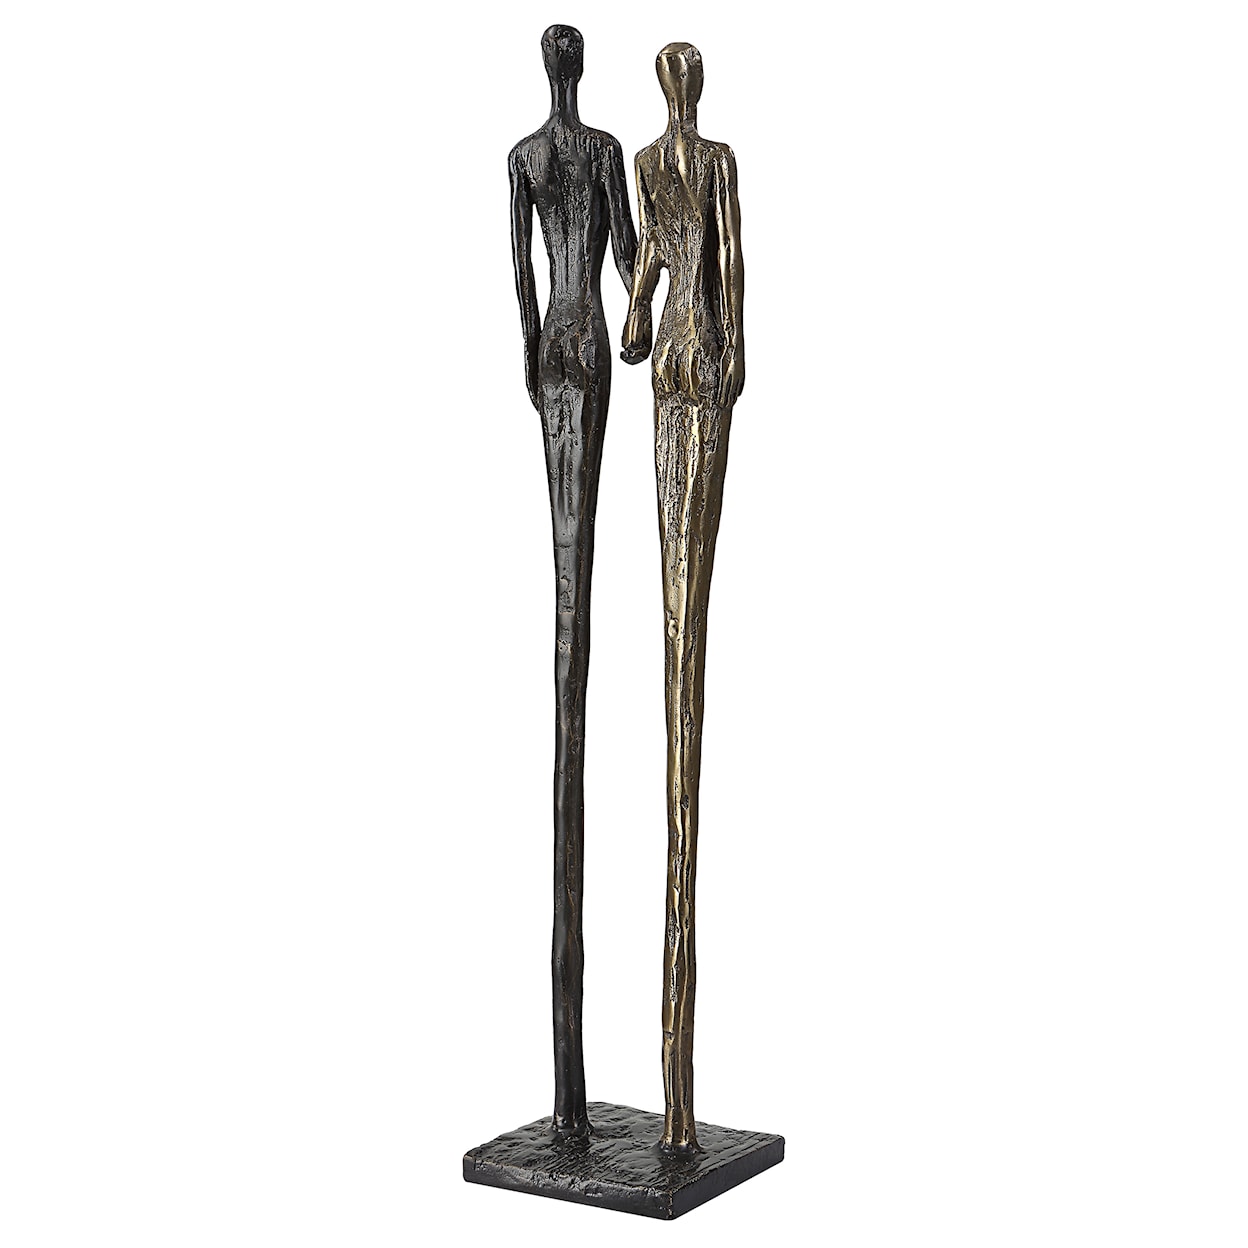 Uttermost Two's Two's Company Cast Iron Sculpture